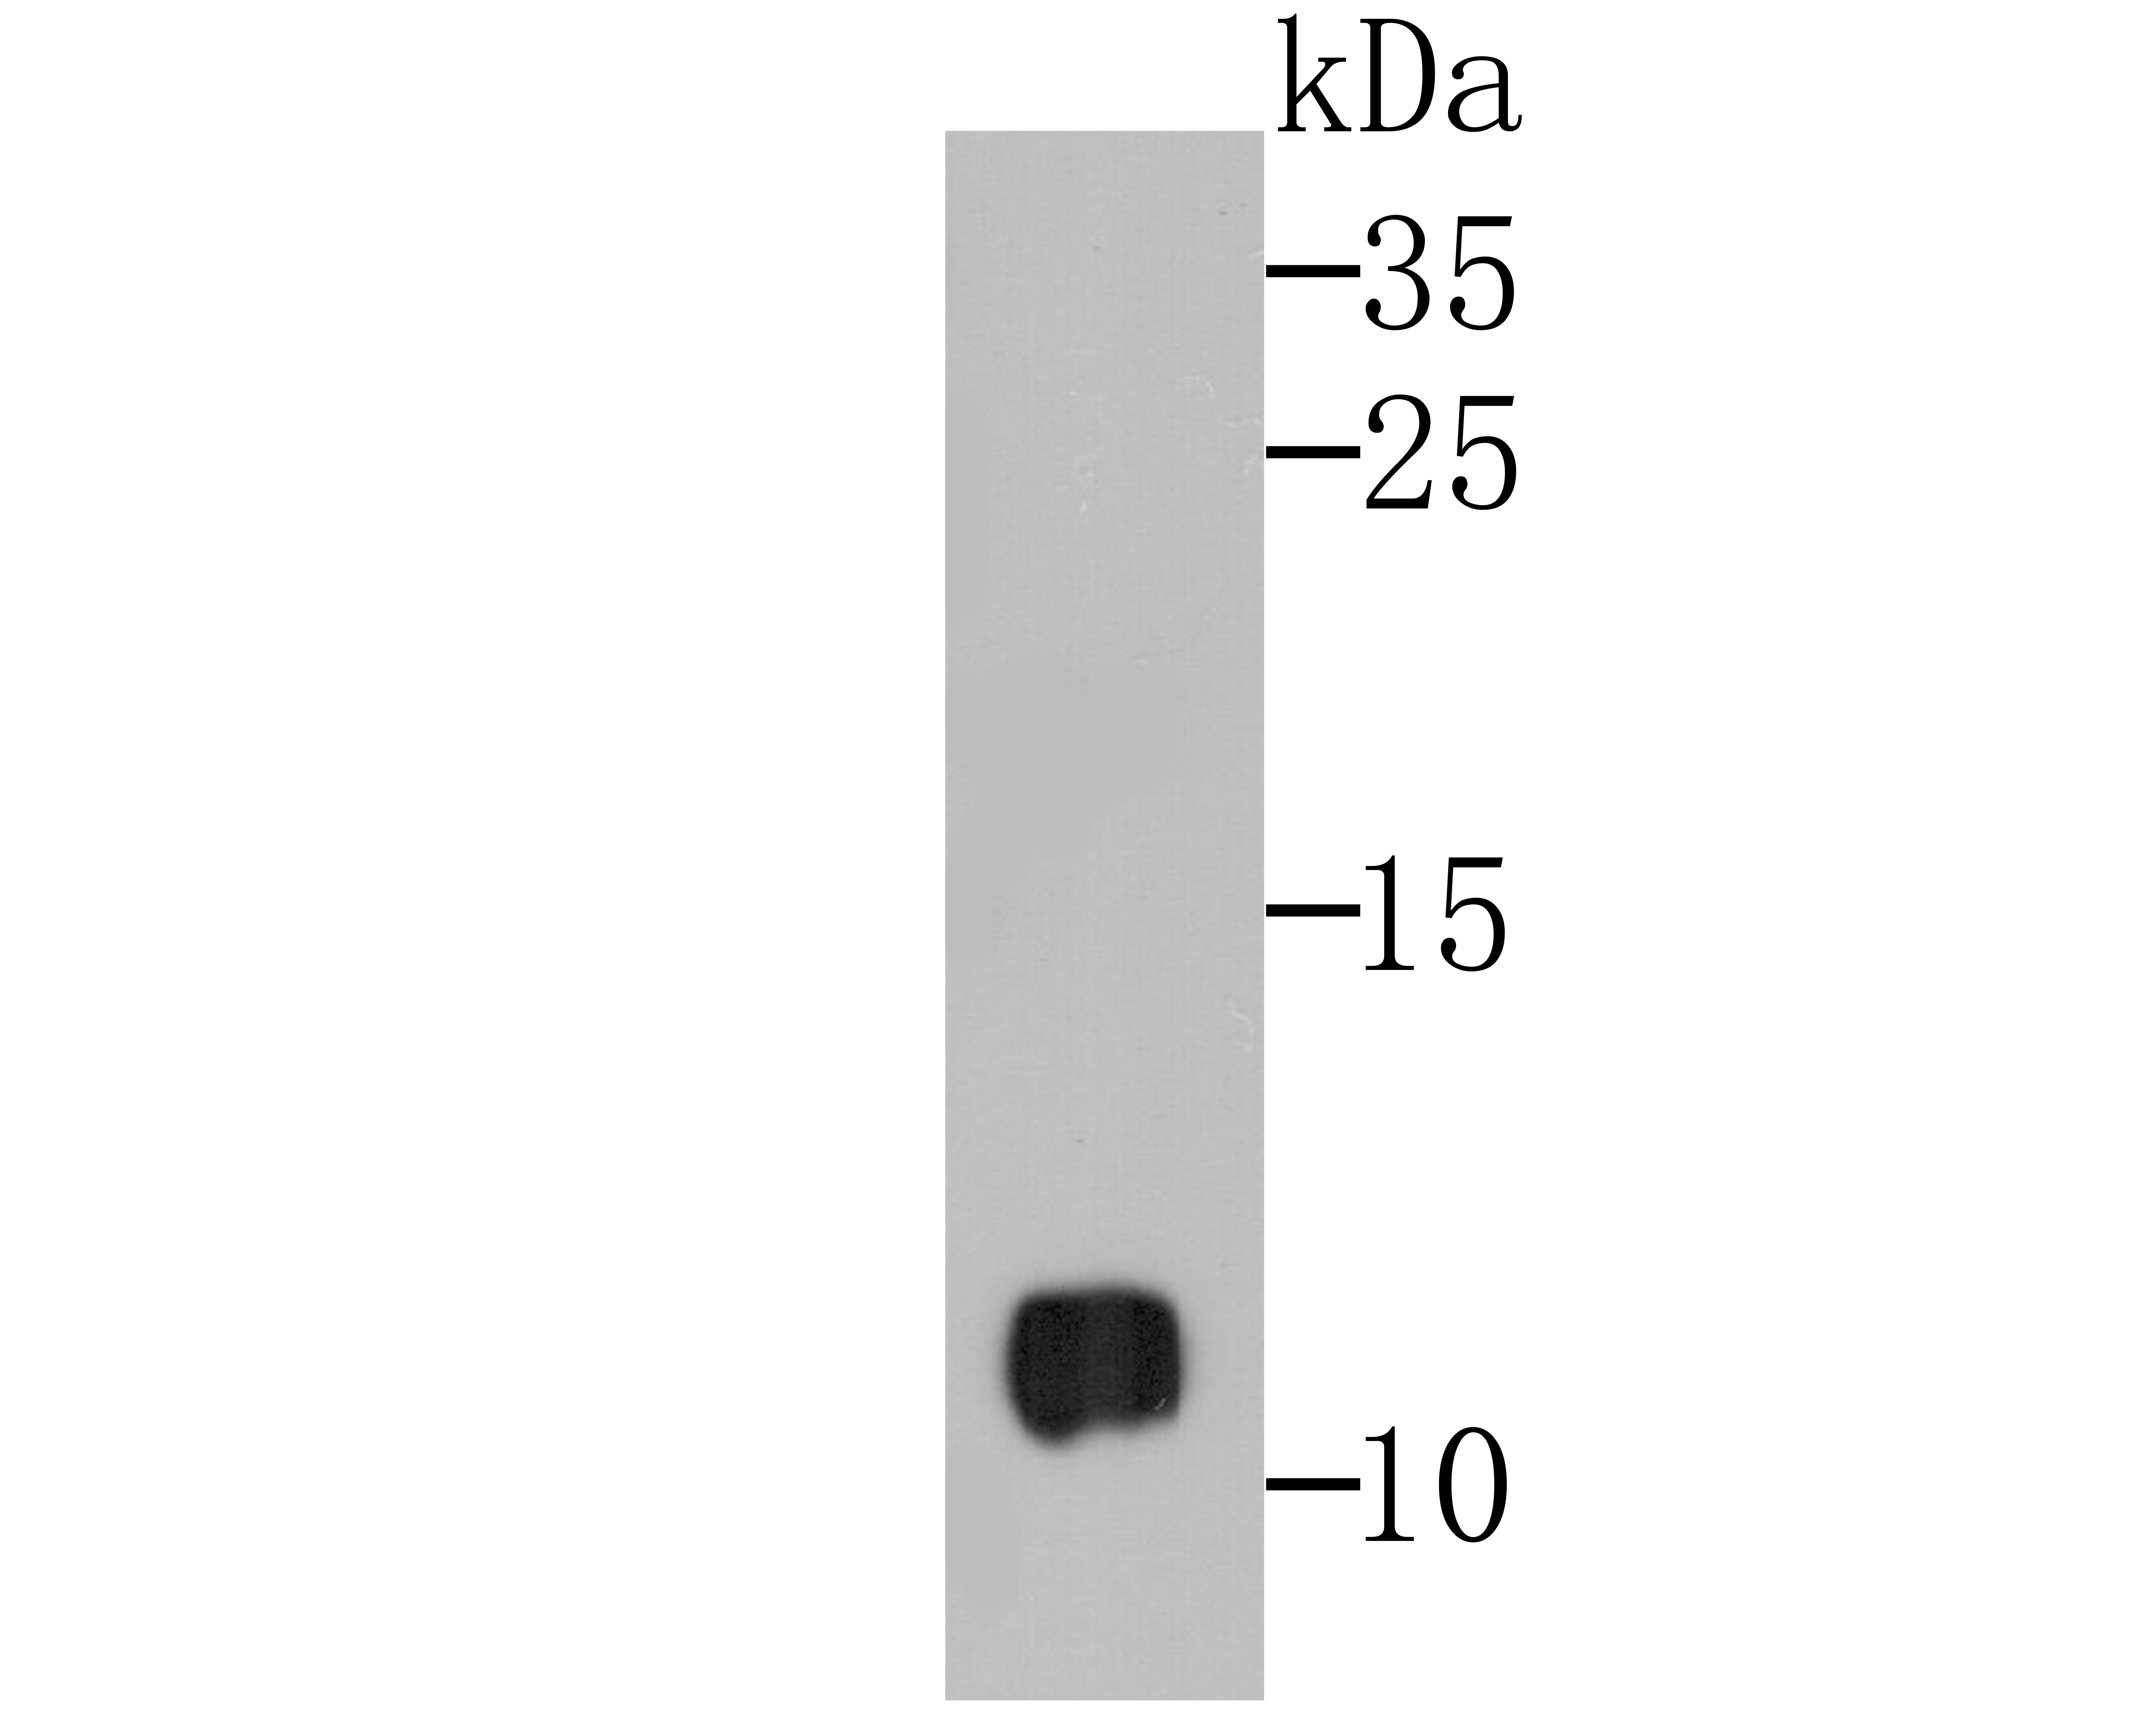 Western blot analysis of RBX1 on HepG2 cell lysates using anti-RBX1 antibody at 1/500 dilution.